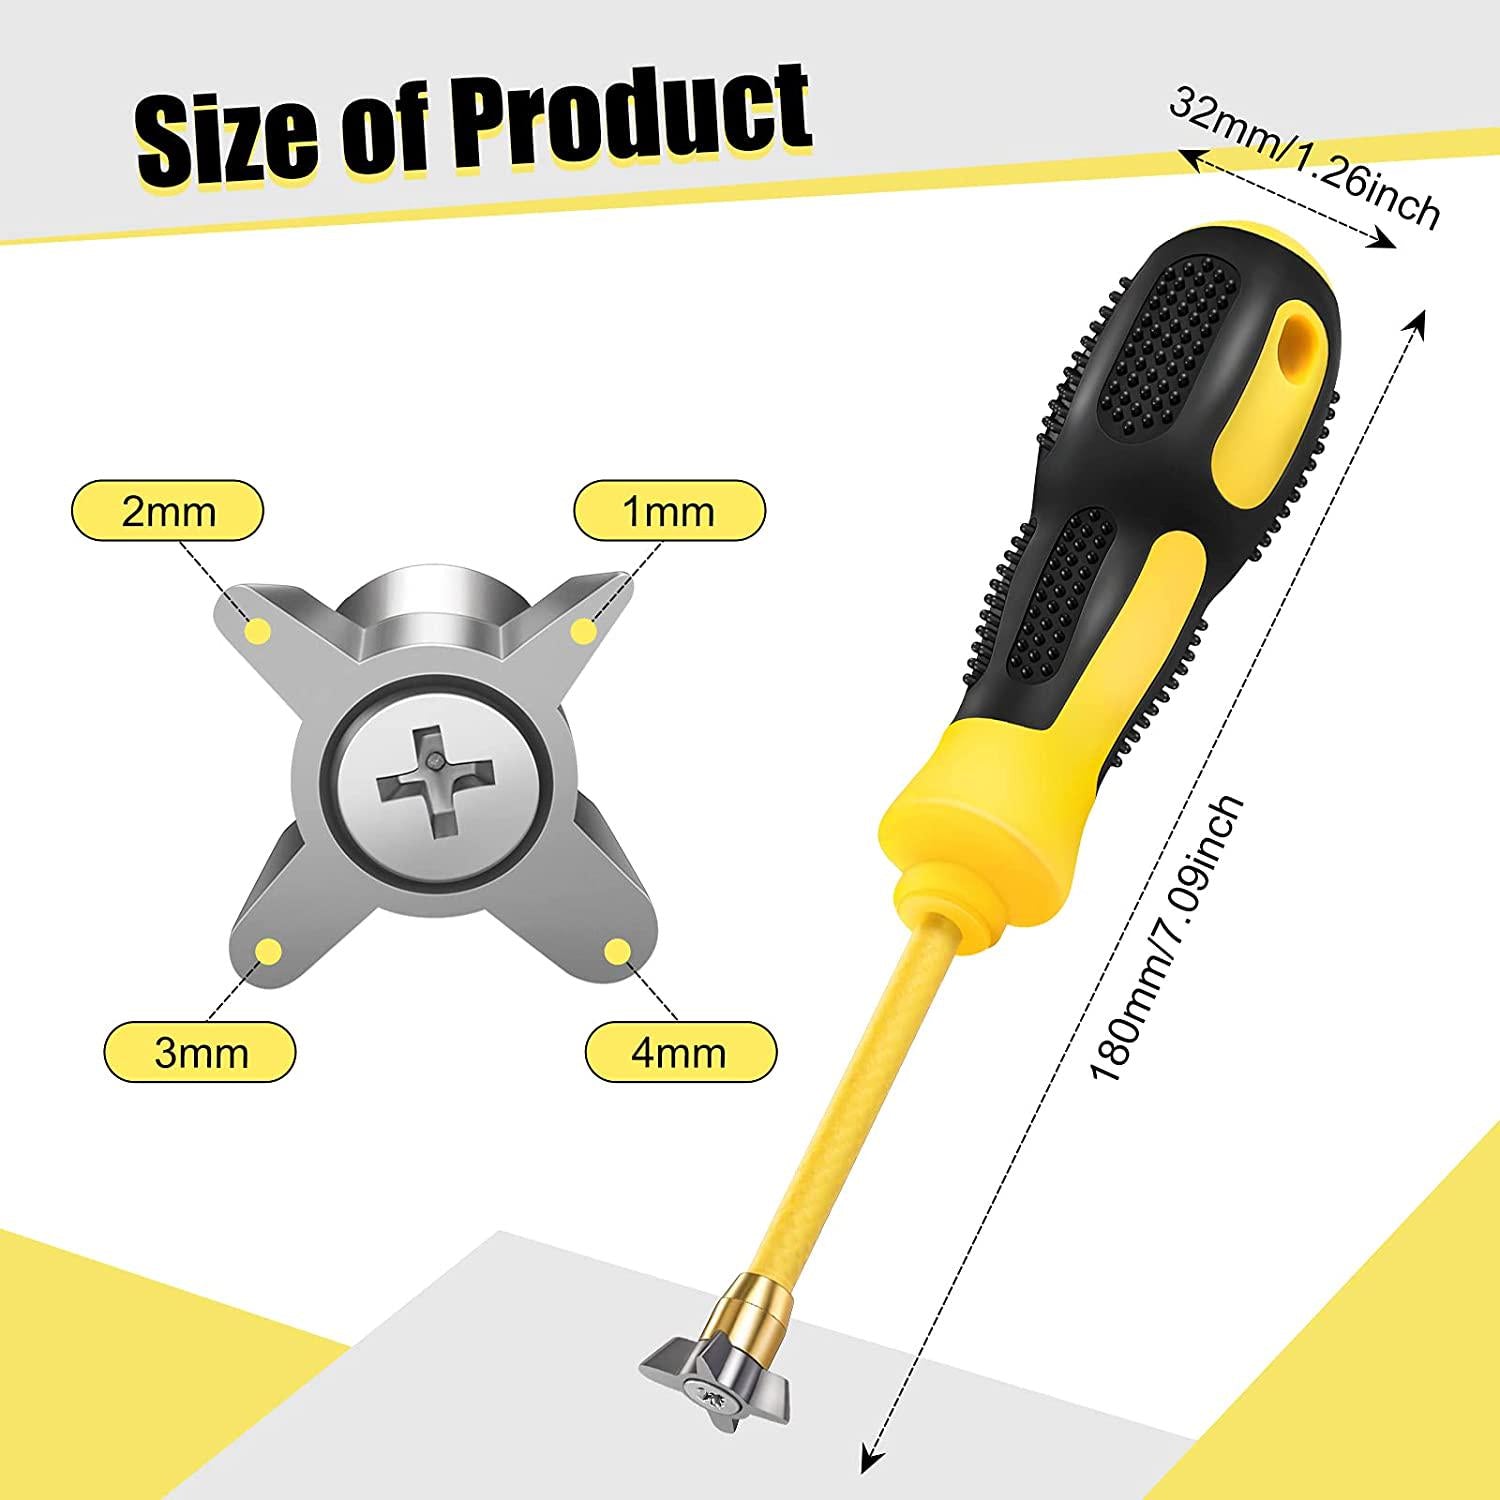 Zhengmy, Grout Removal Tool 4 in 1 Grout Cleaning Tool Grout Remover Tool Scraper Cemented Carbide Alloy Head Tile Removal Tool Caulking Cleaner for Cleaning Floor Ceramic Tile Gaps